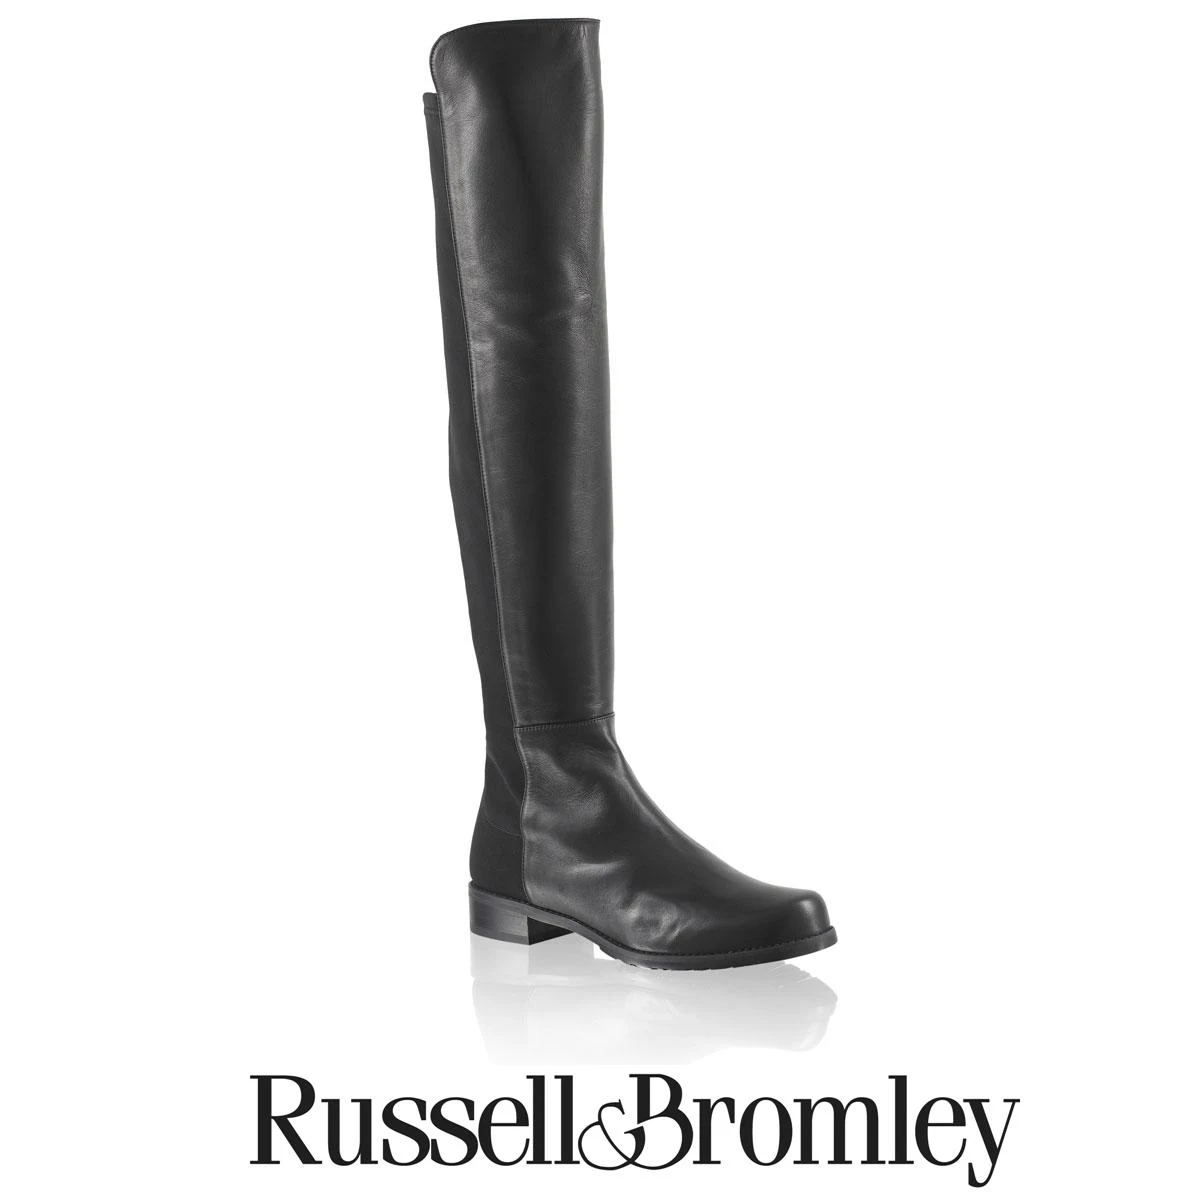 Duchess of Cambridge - Kate Midletton - RUSSELL & BROMLEY   